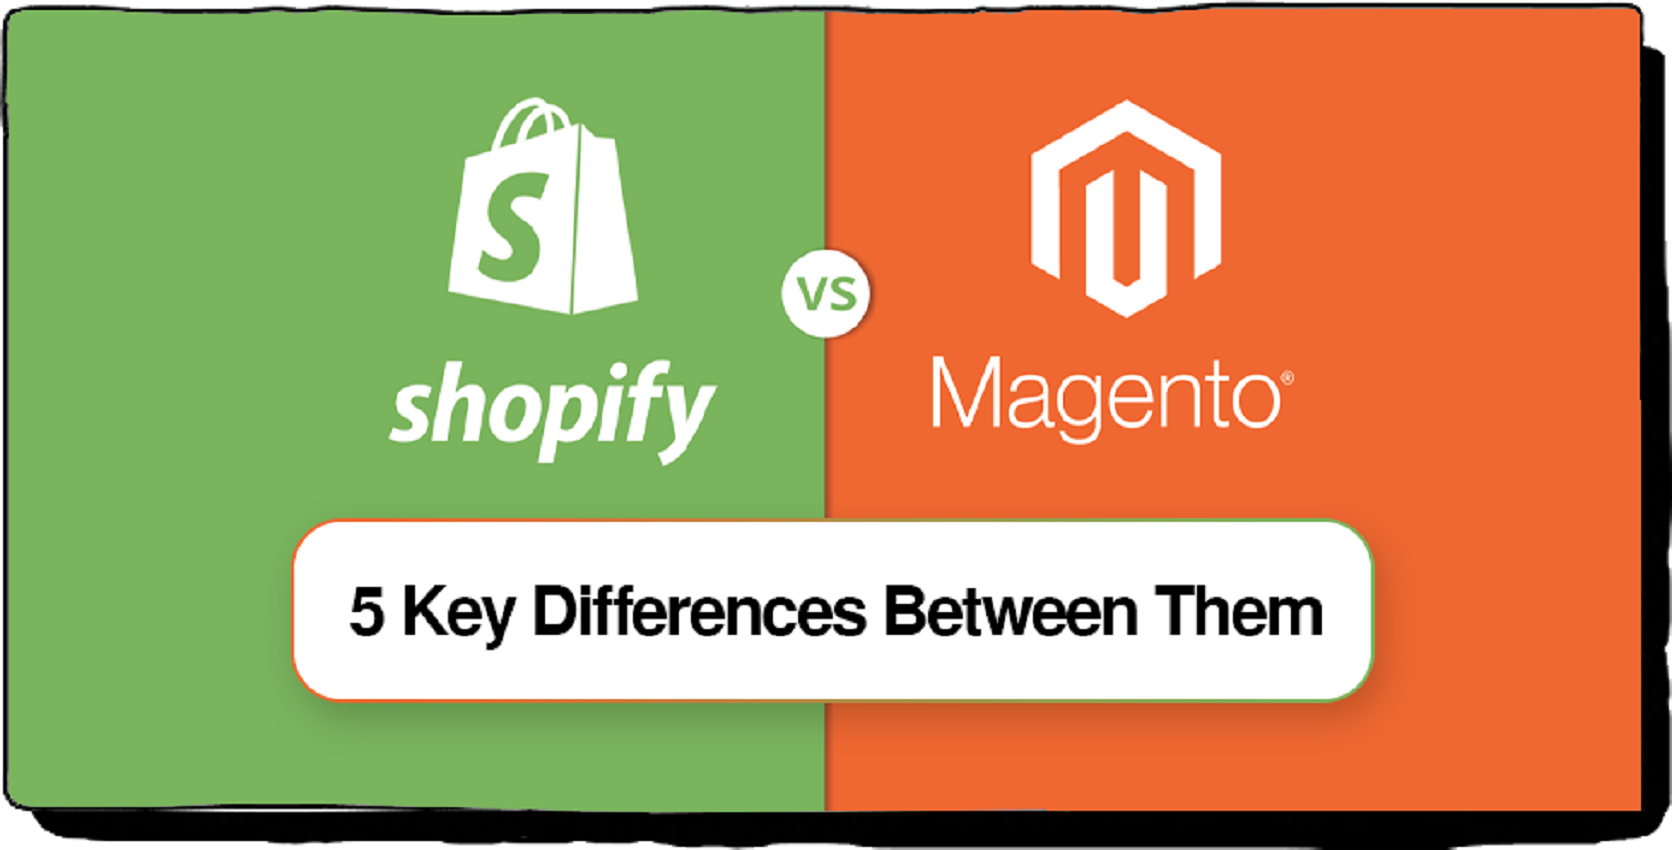 Shopify-Vs.-Magento-5-Key-Differences-Between-Them-151b9c1d